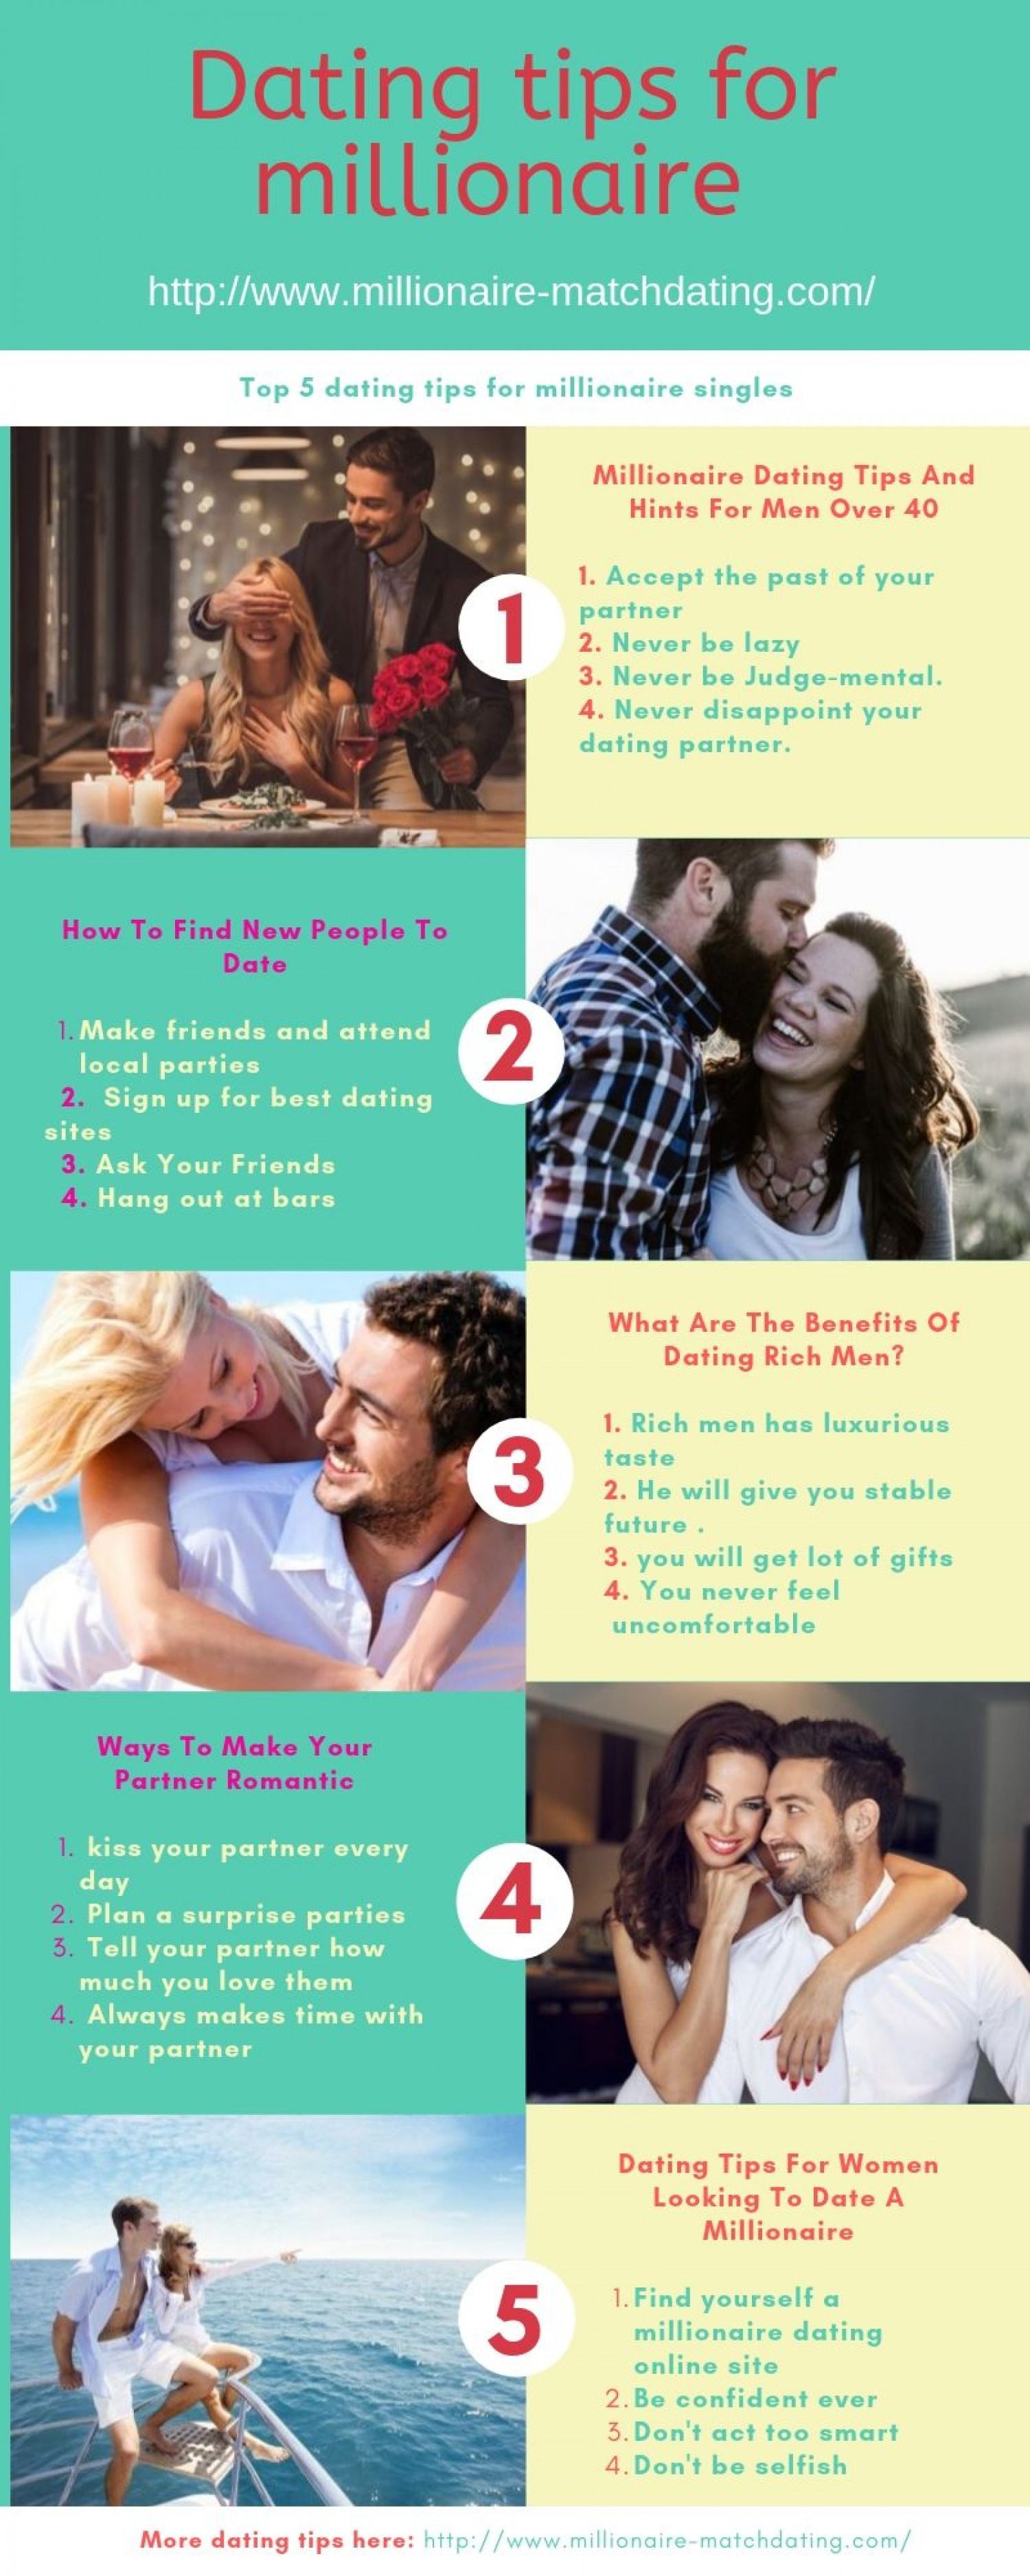 Rich men dating sites Infographic